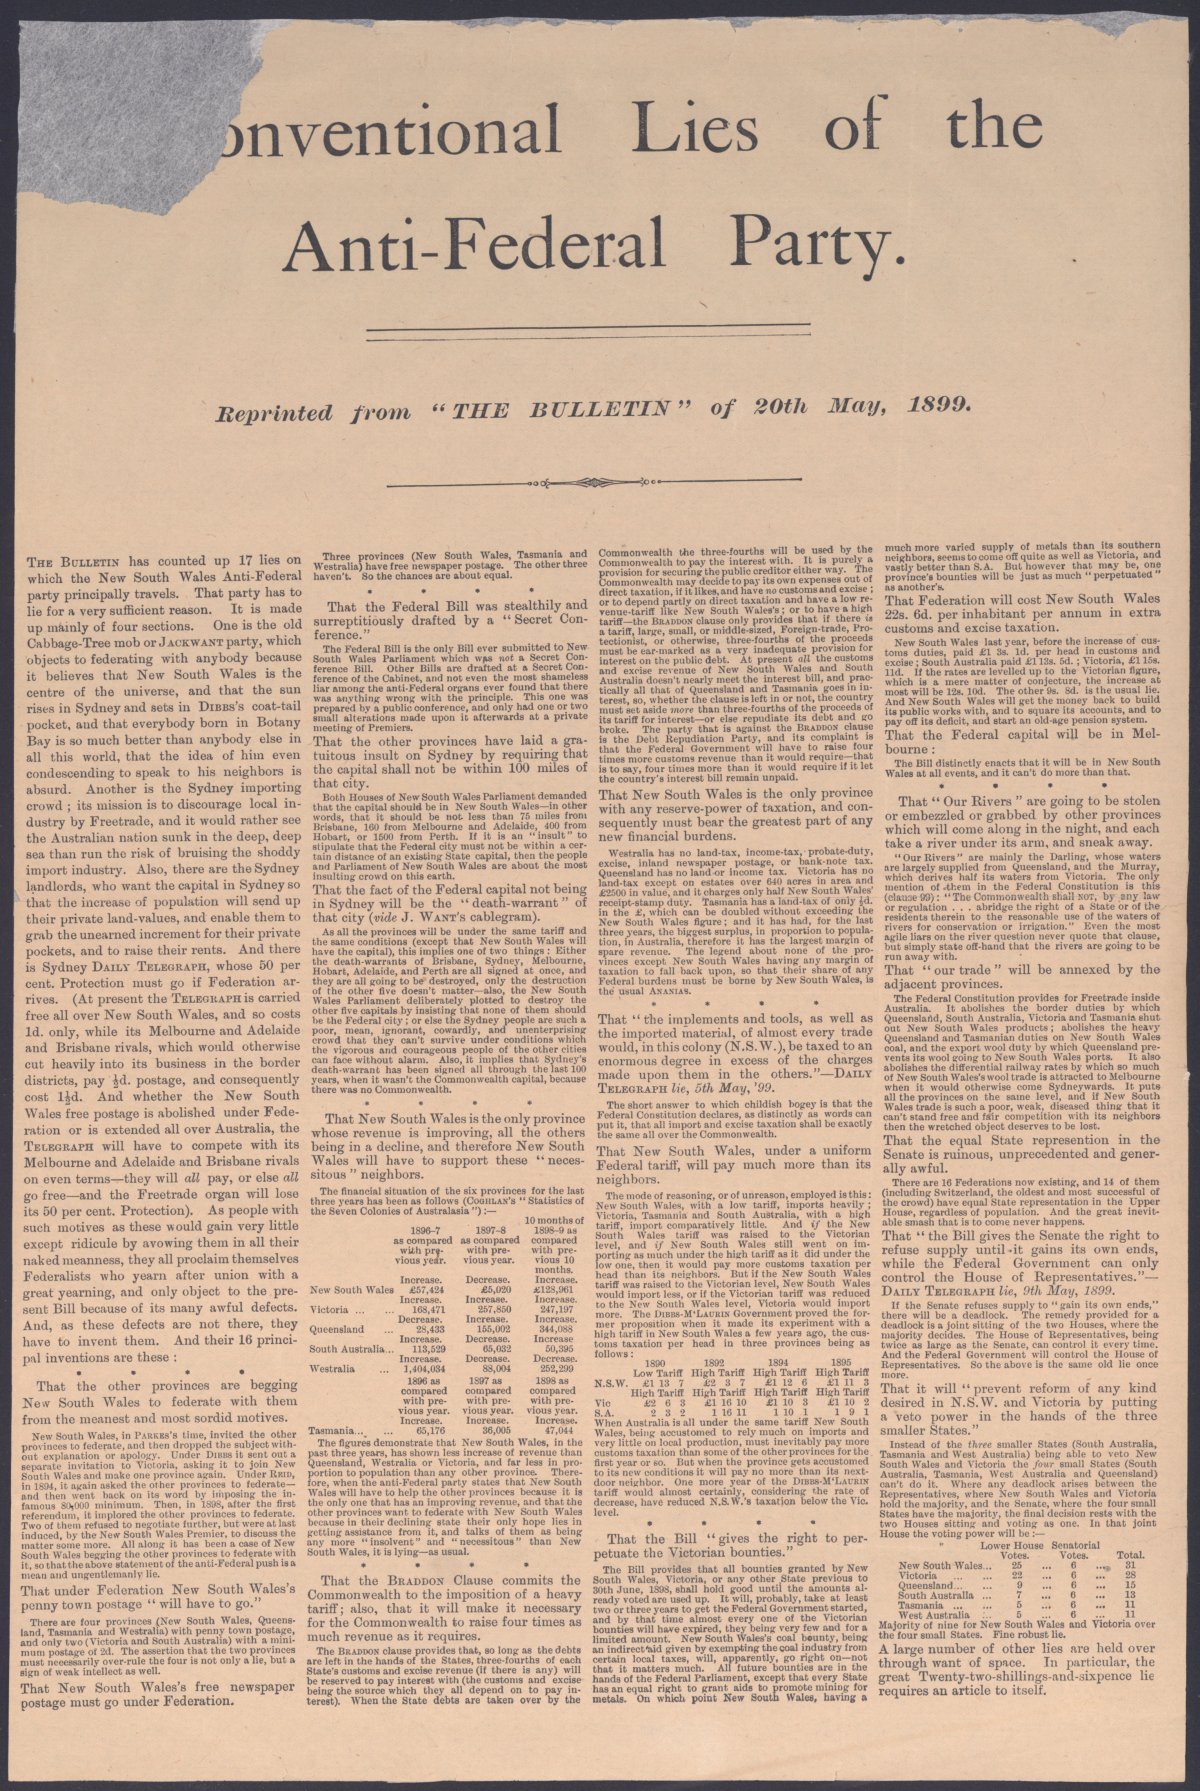 A yellowed sheet of paper with the headline "[Co]nventional Lies of the Anti-Federal Party". The "C" and "O" of the word "conventional" is missing as the corner of the page has been torn off. The very small text is set out in four columns